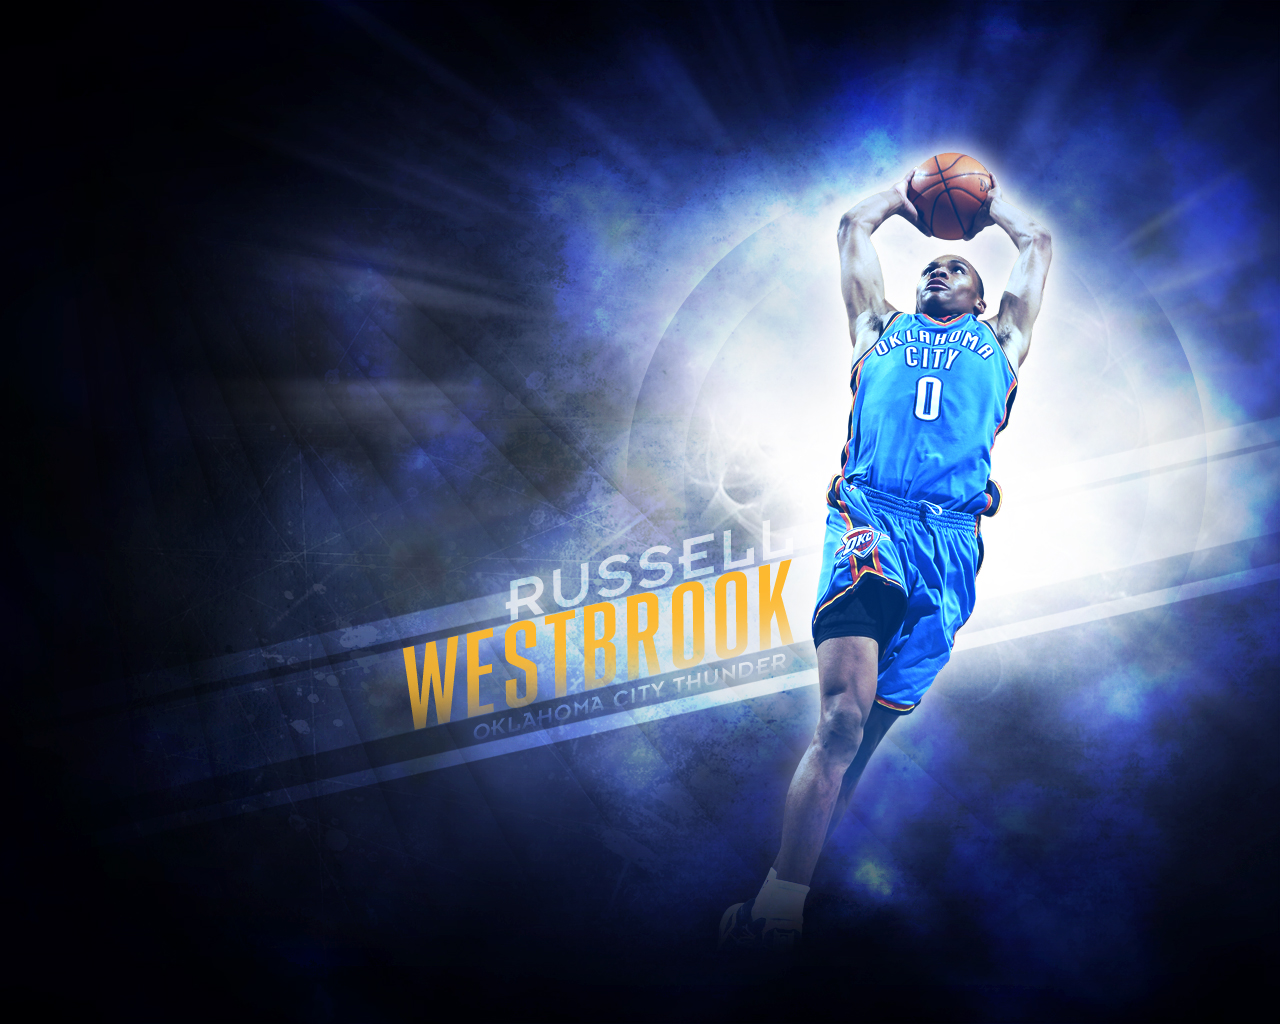 Its All About Basketball Russell Westbrook New HD Wallpaper